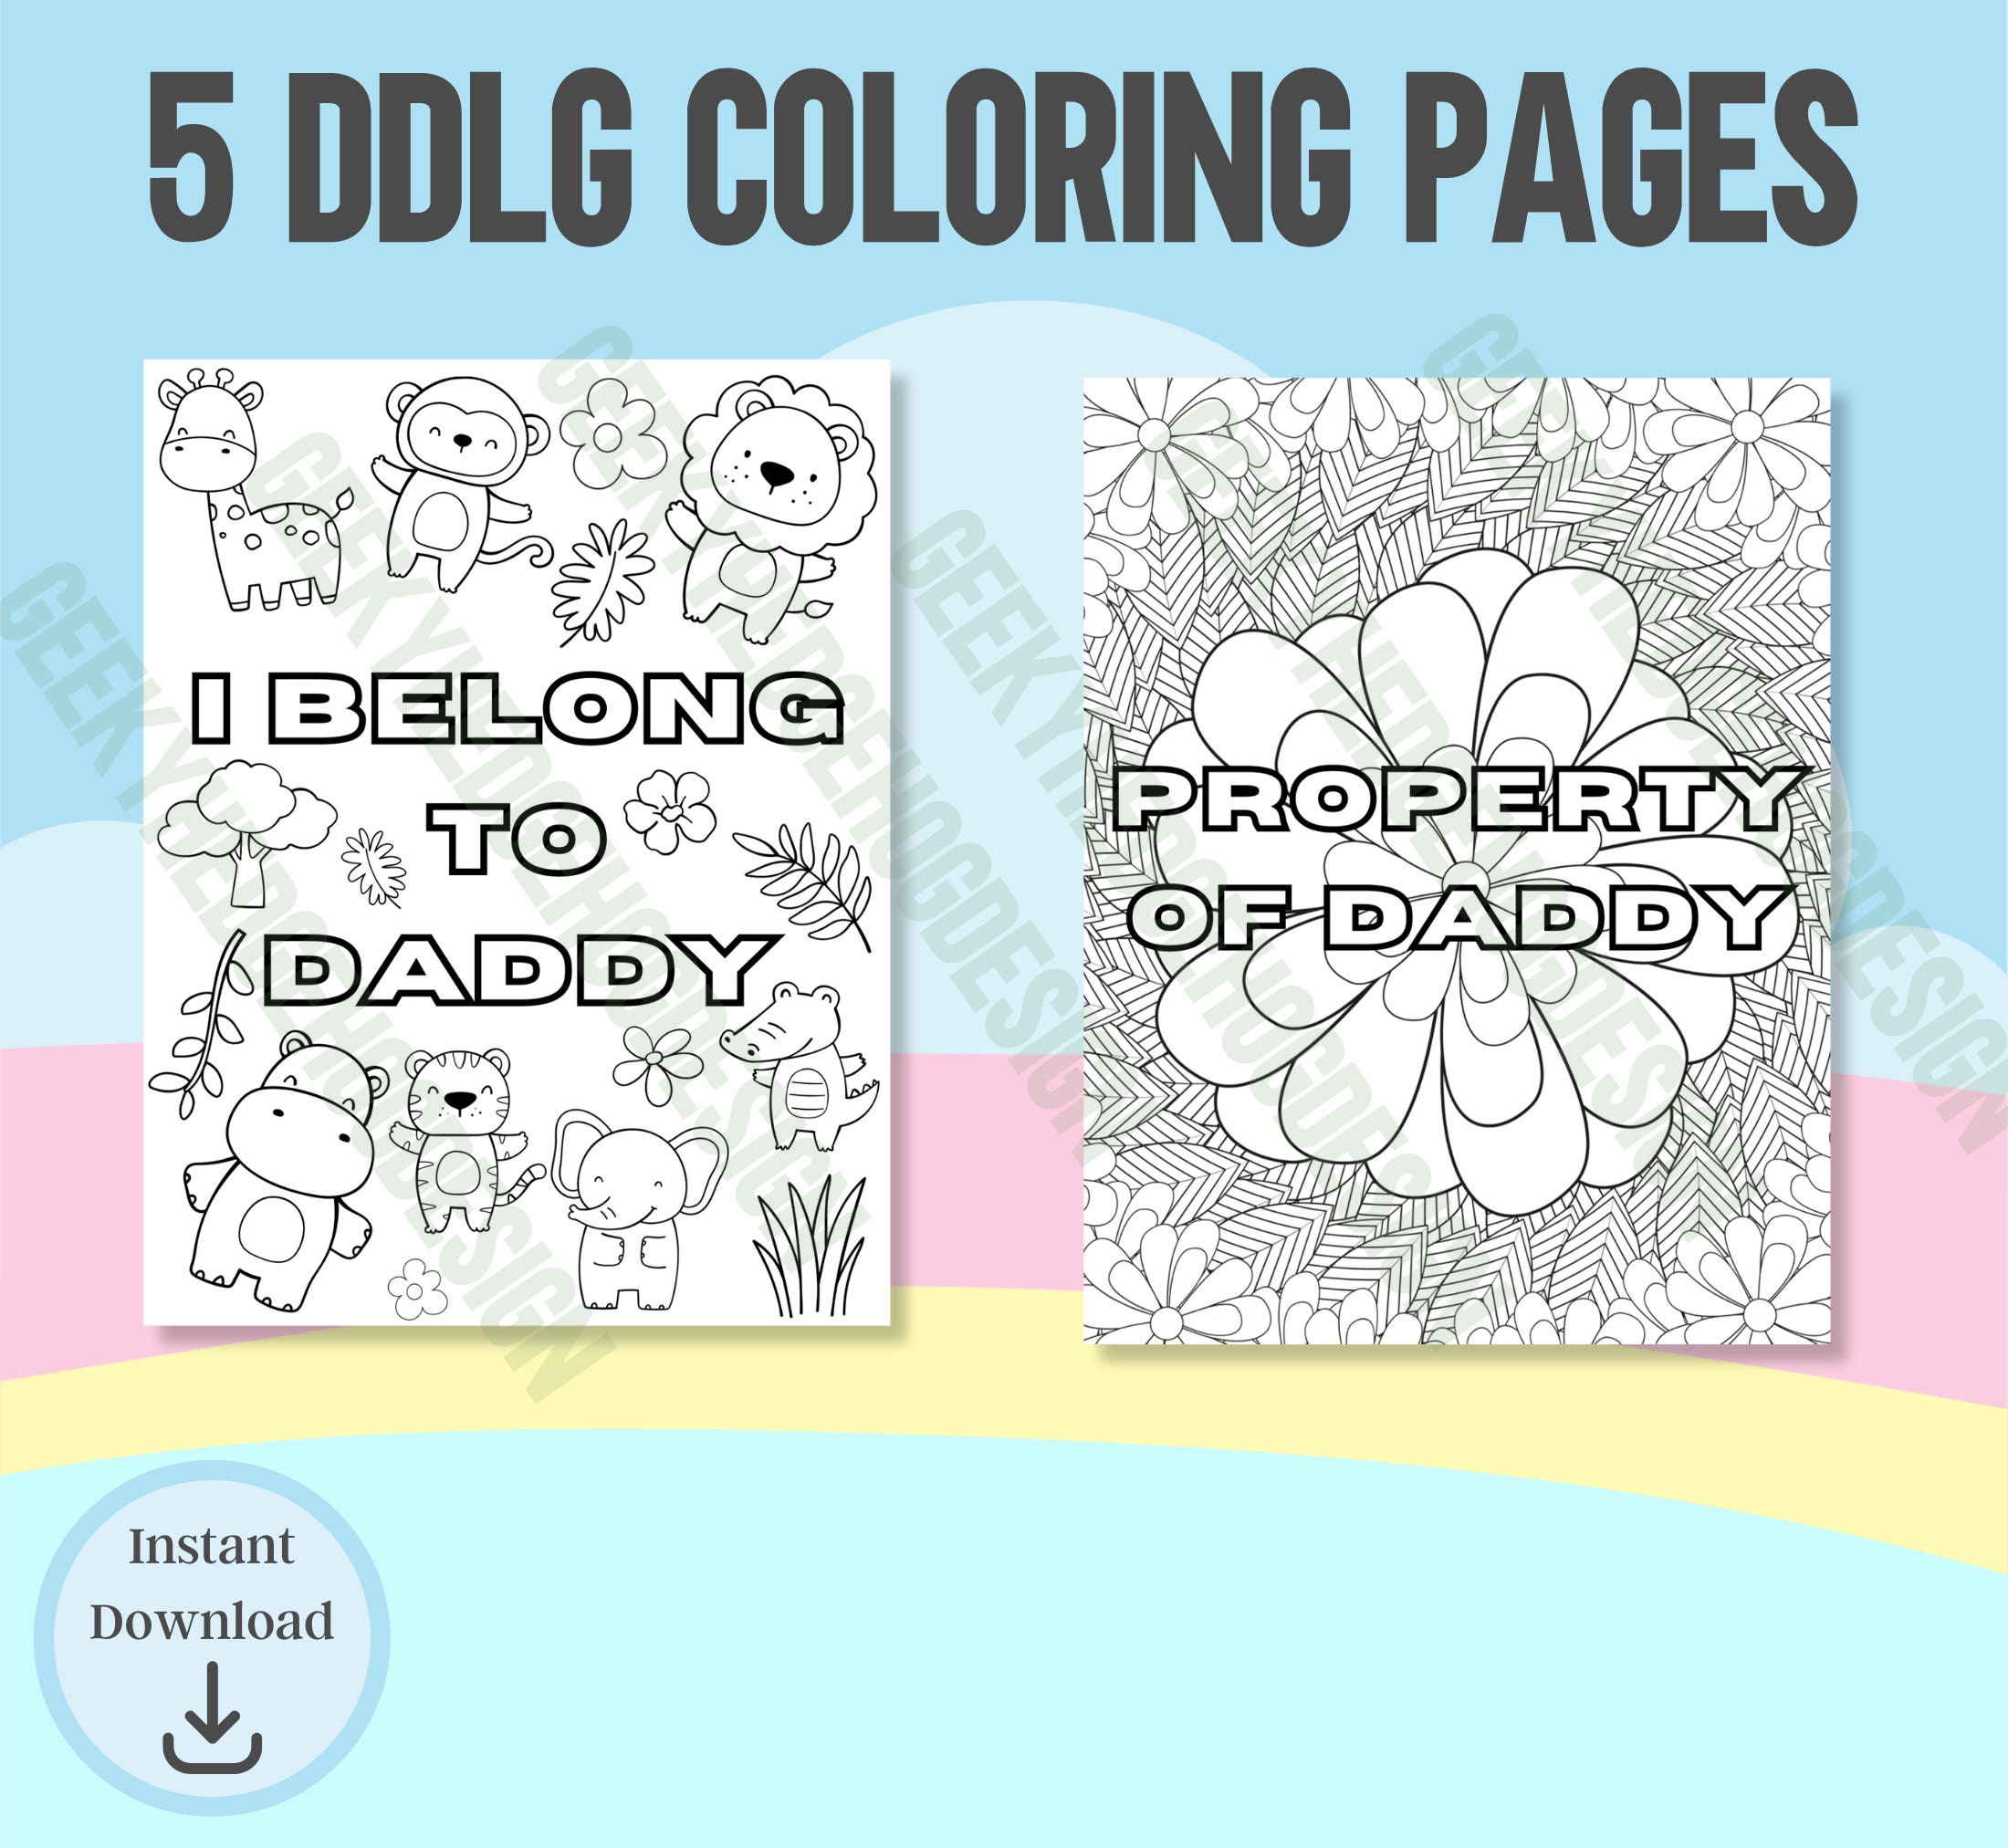 Coloring pages ddlg abdl yes daddy babygirl in training adult coloring book little space activity bdsm sub brat printable